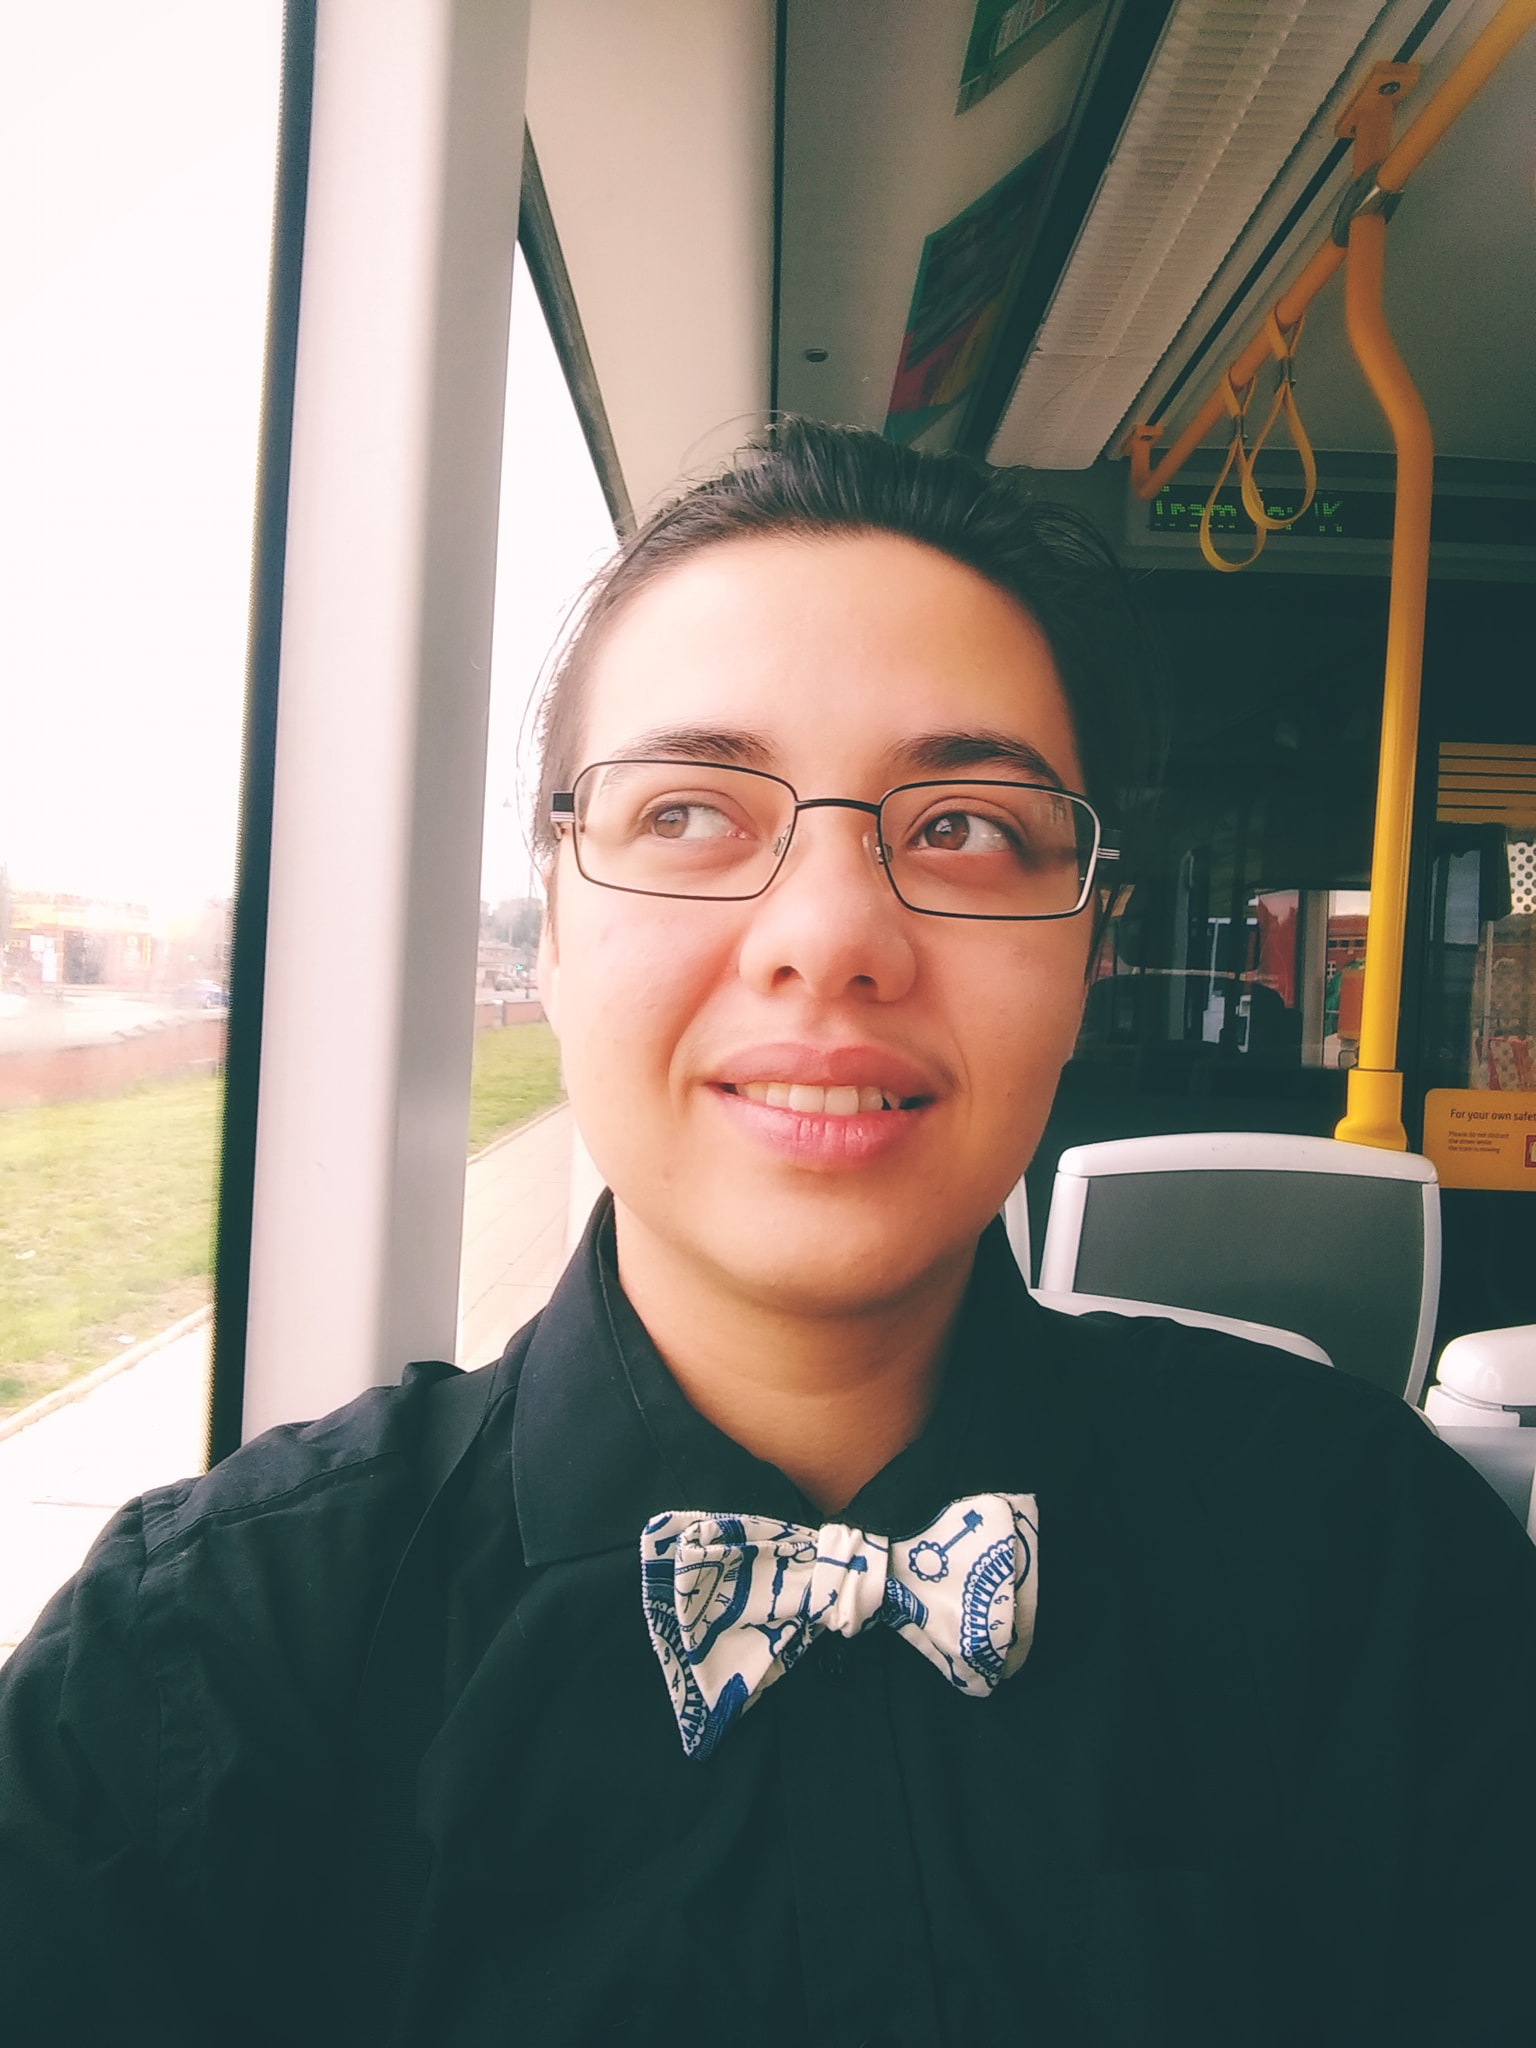 A young man with glasses and a bowtie.